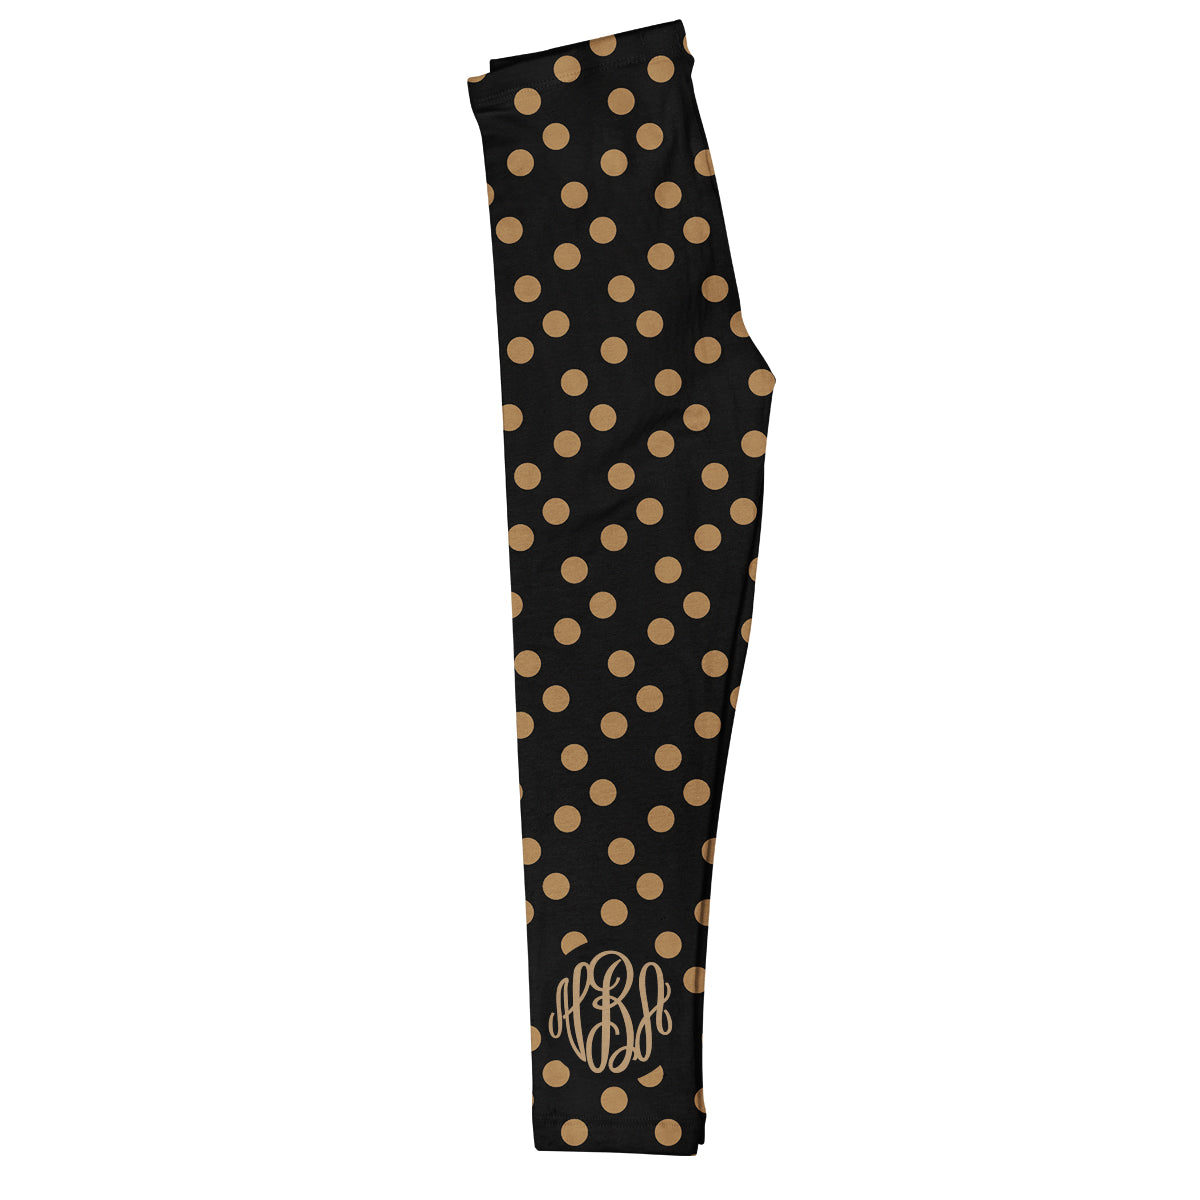 Girls black and yellow polka dots leggings with monogram - Wimziy&Co.